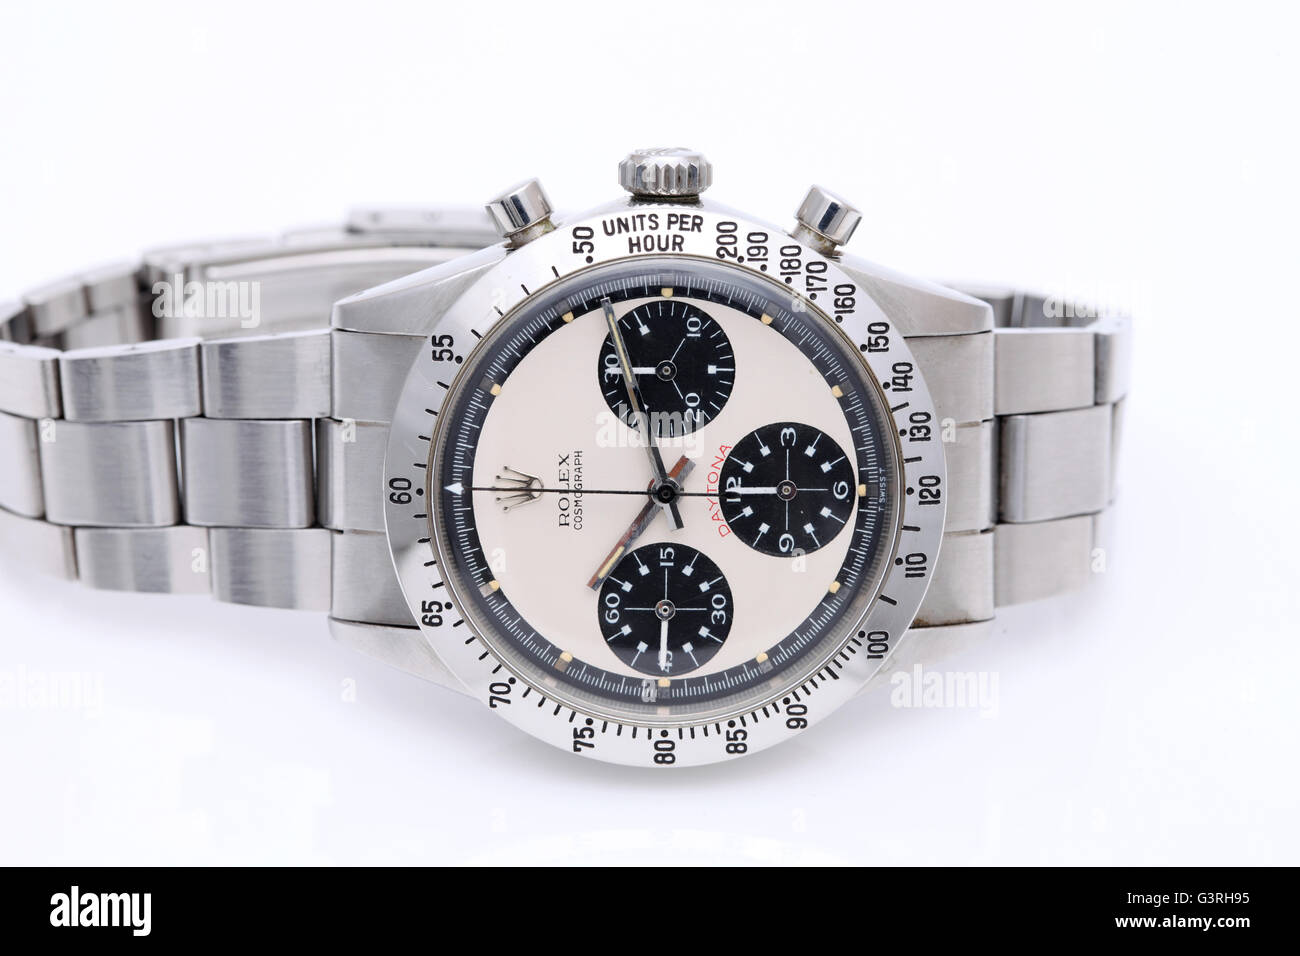 Rolex cosmograph daytona" vintage wrist watch in a display window of vintage-shop  on white background Stock Photo - Alamy